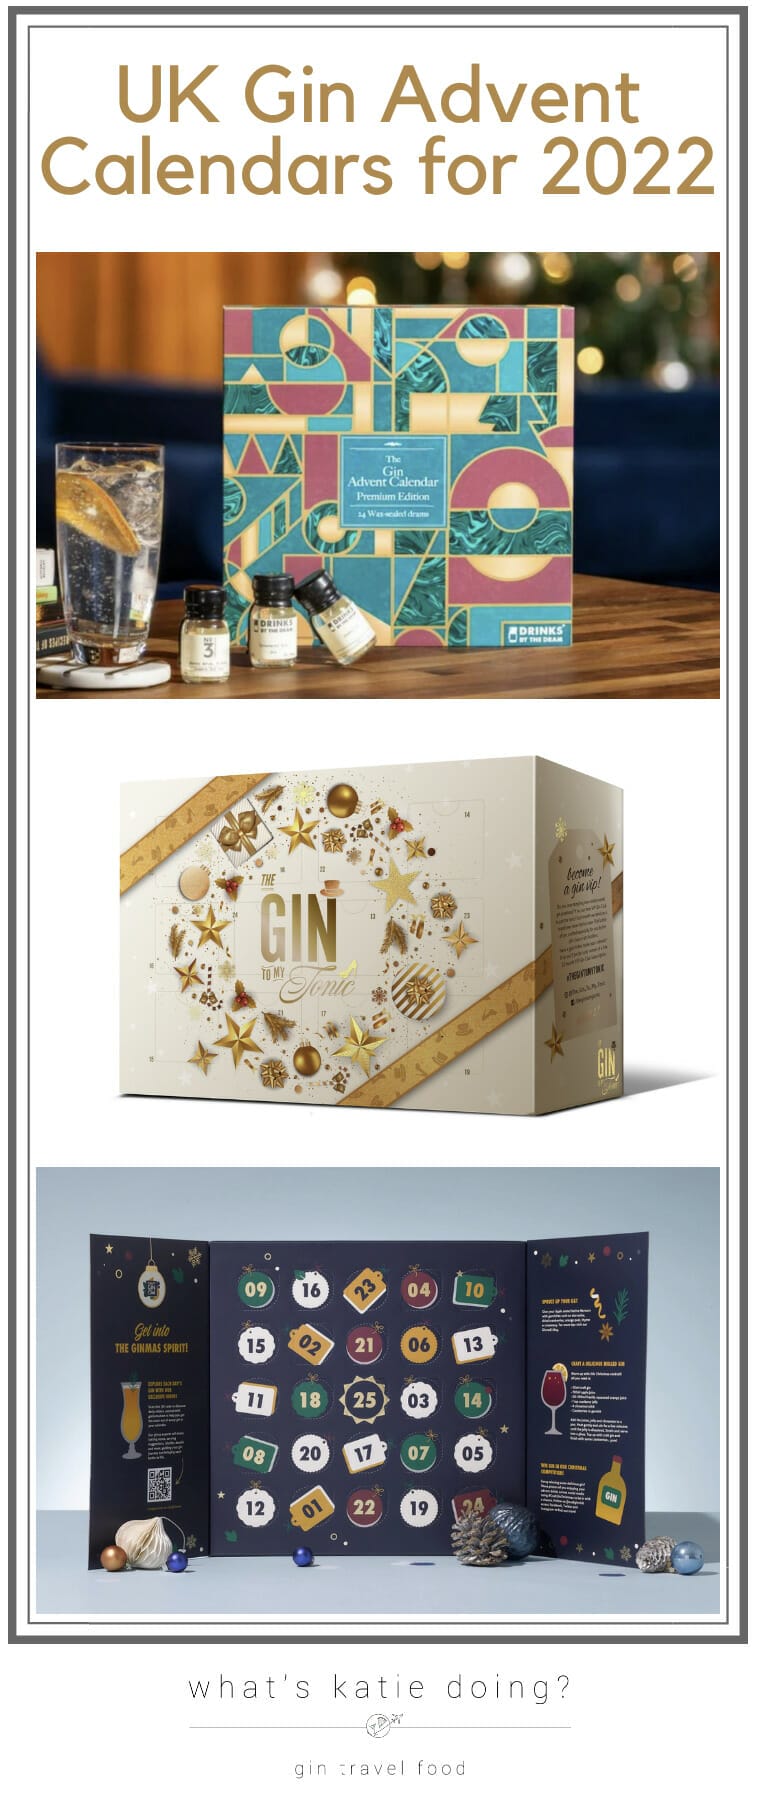 3 gin advent calendars for 2022